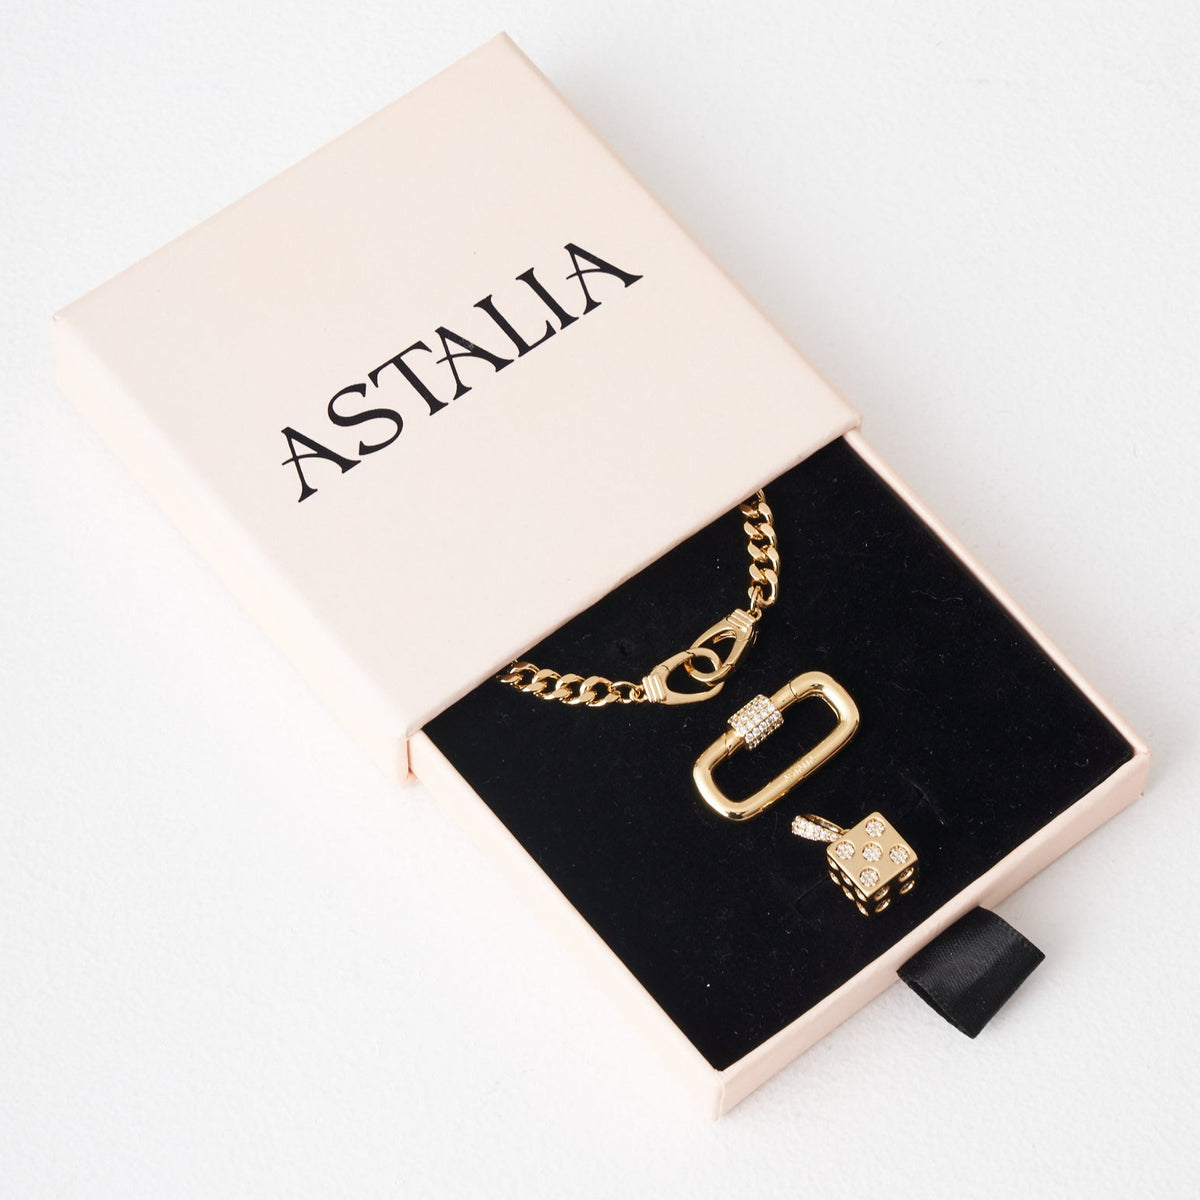 ASTALIA JEWELLERY by Taylor and Darby Ward